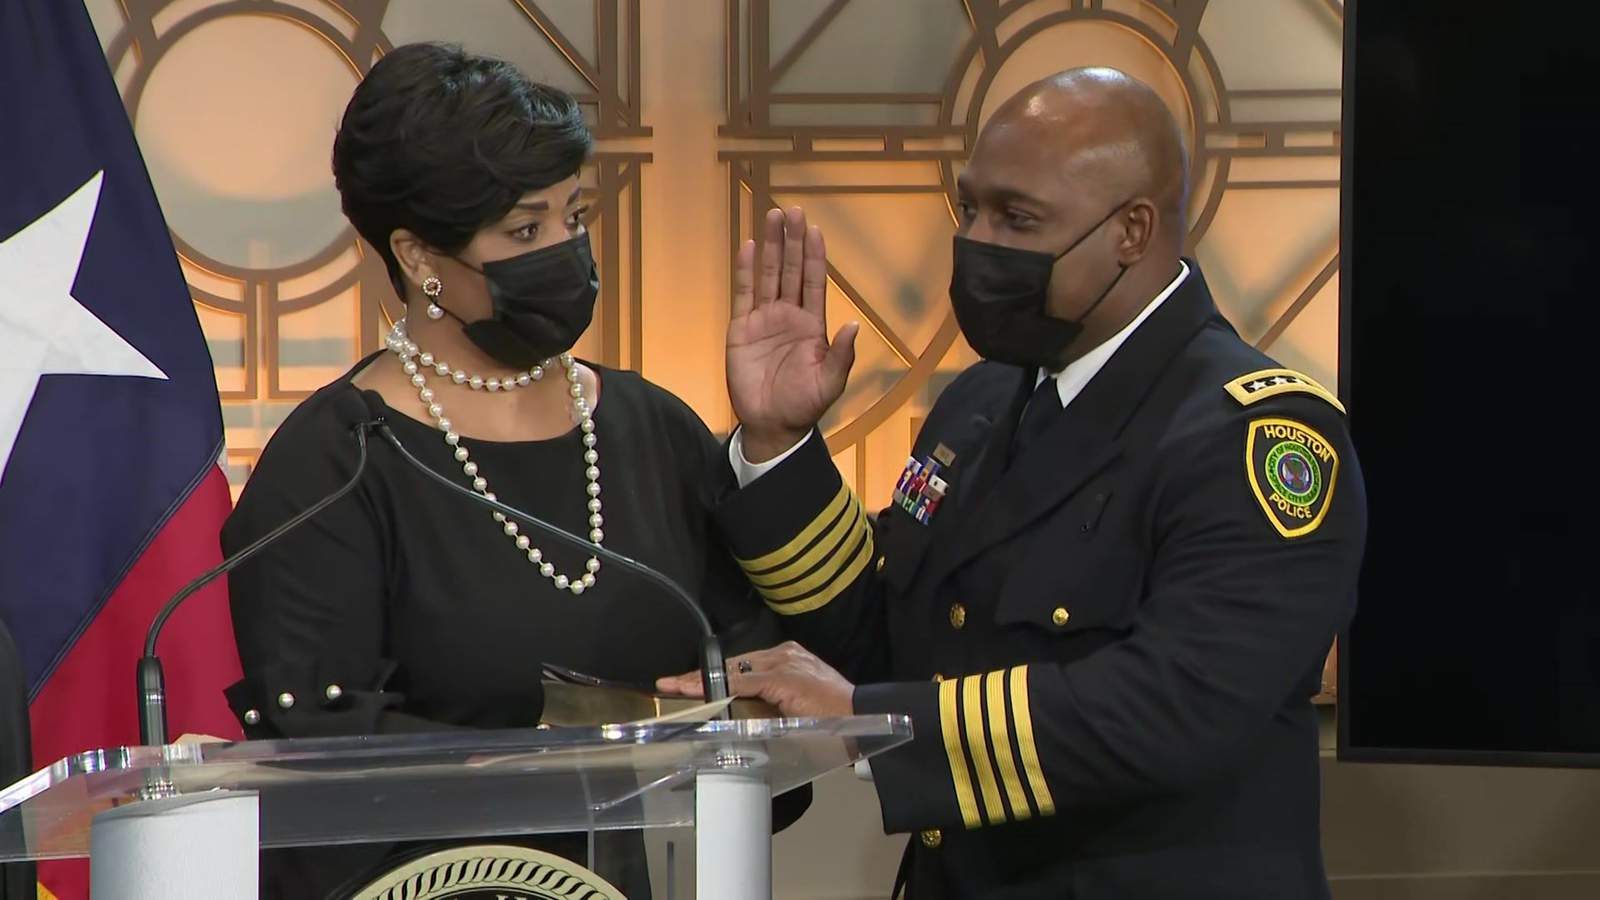 Finner sworn in as Houston’s next police chief